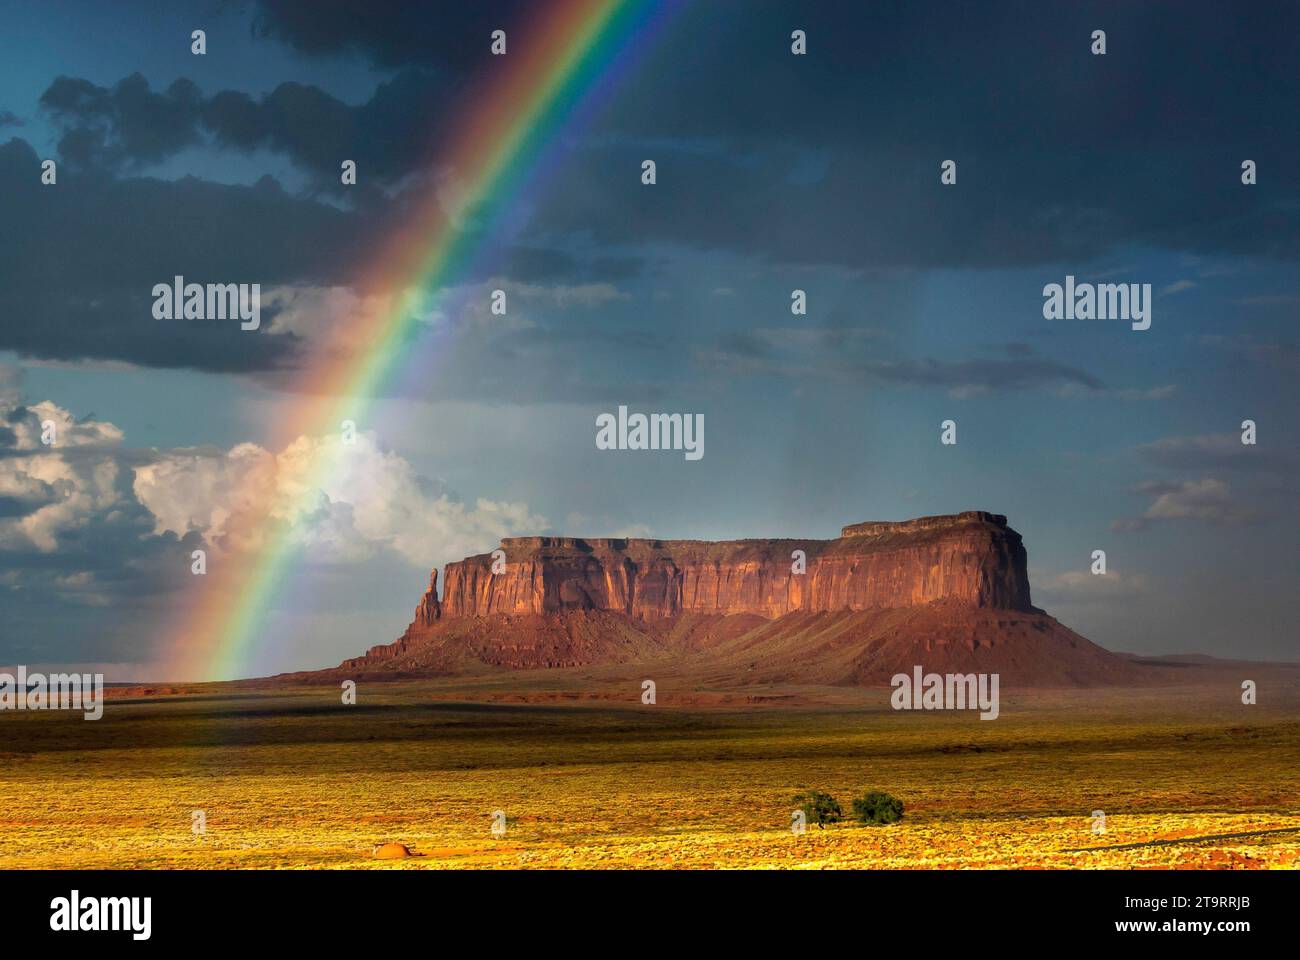 Arcobaleno a Monument Valley, cielo nuvoloso, nuvola, cielo, ovest, west, Utah, USA Foto Stock